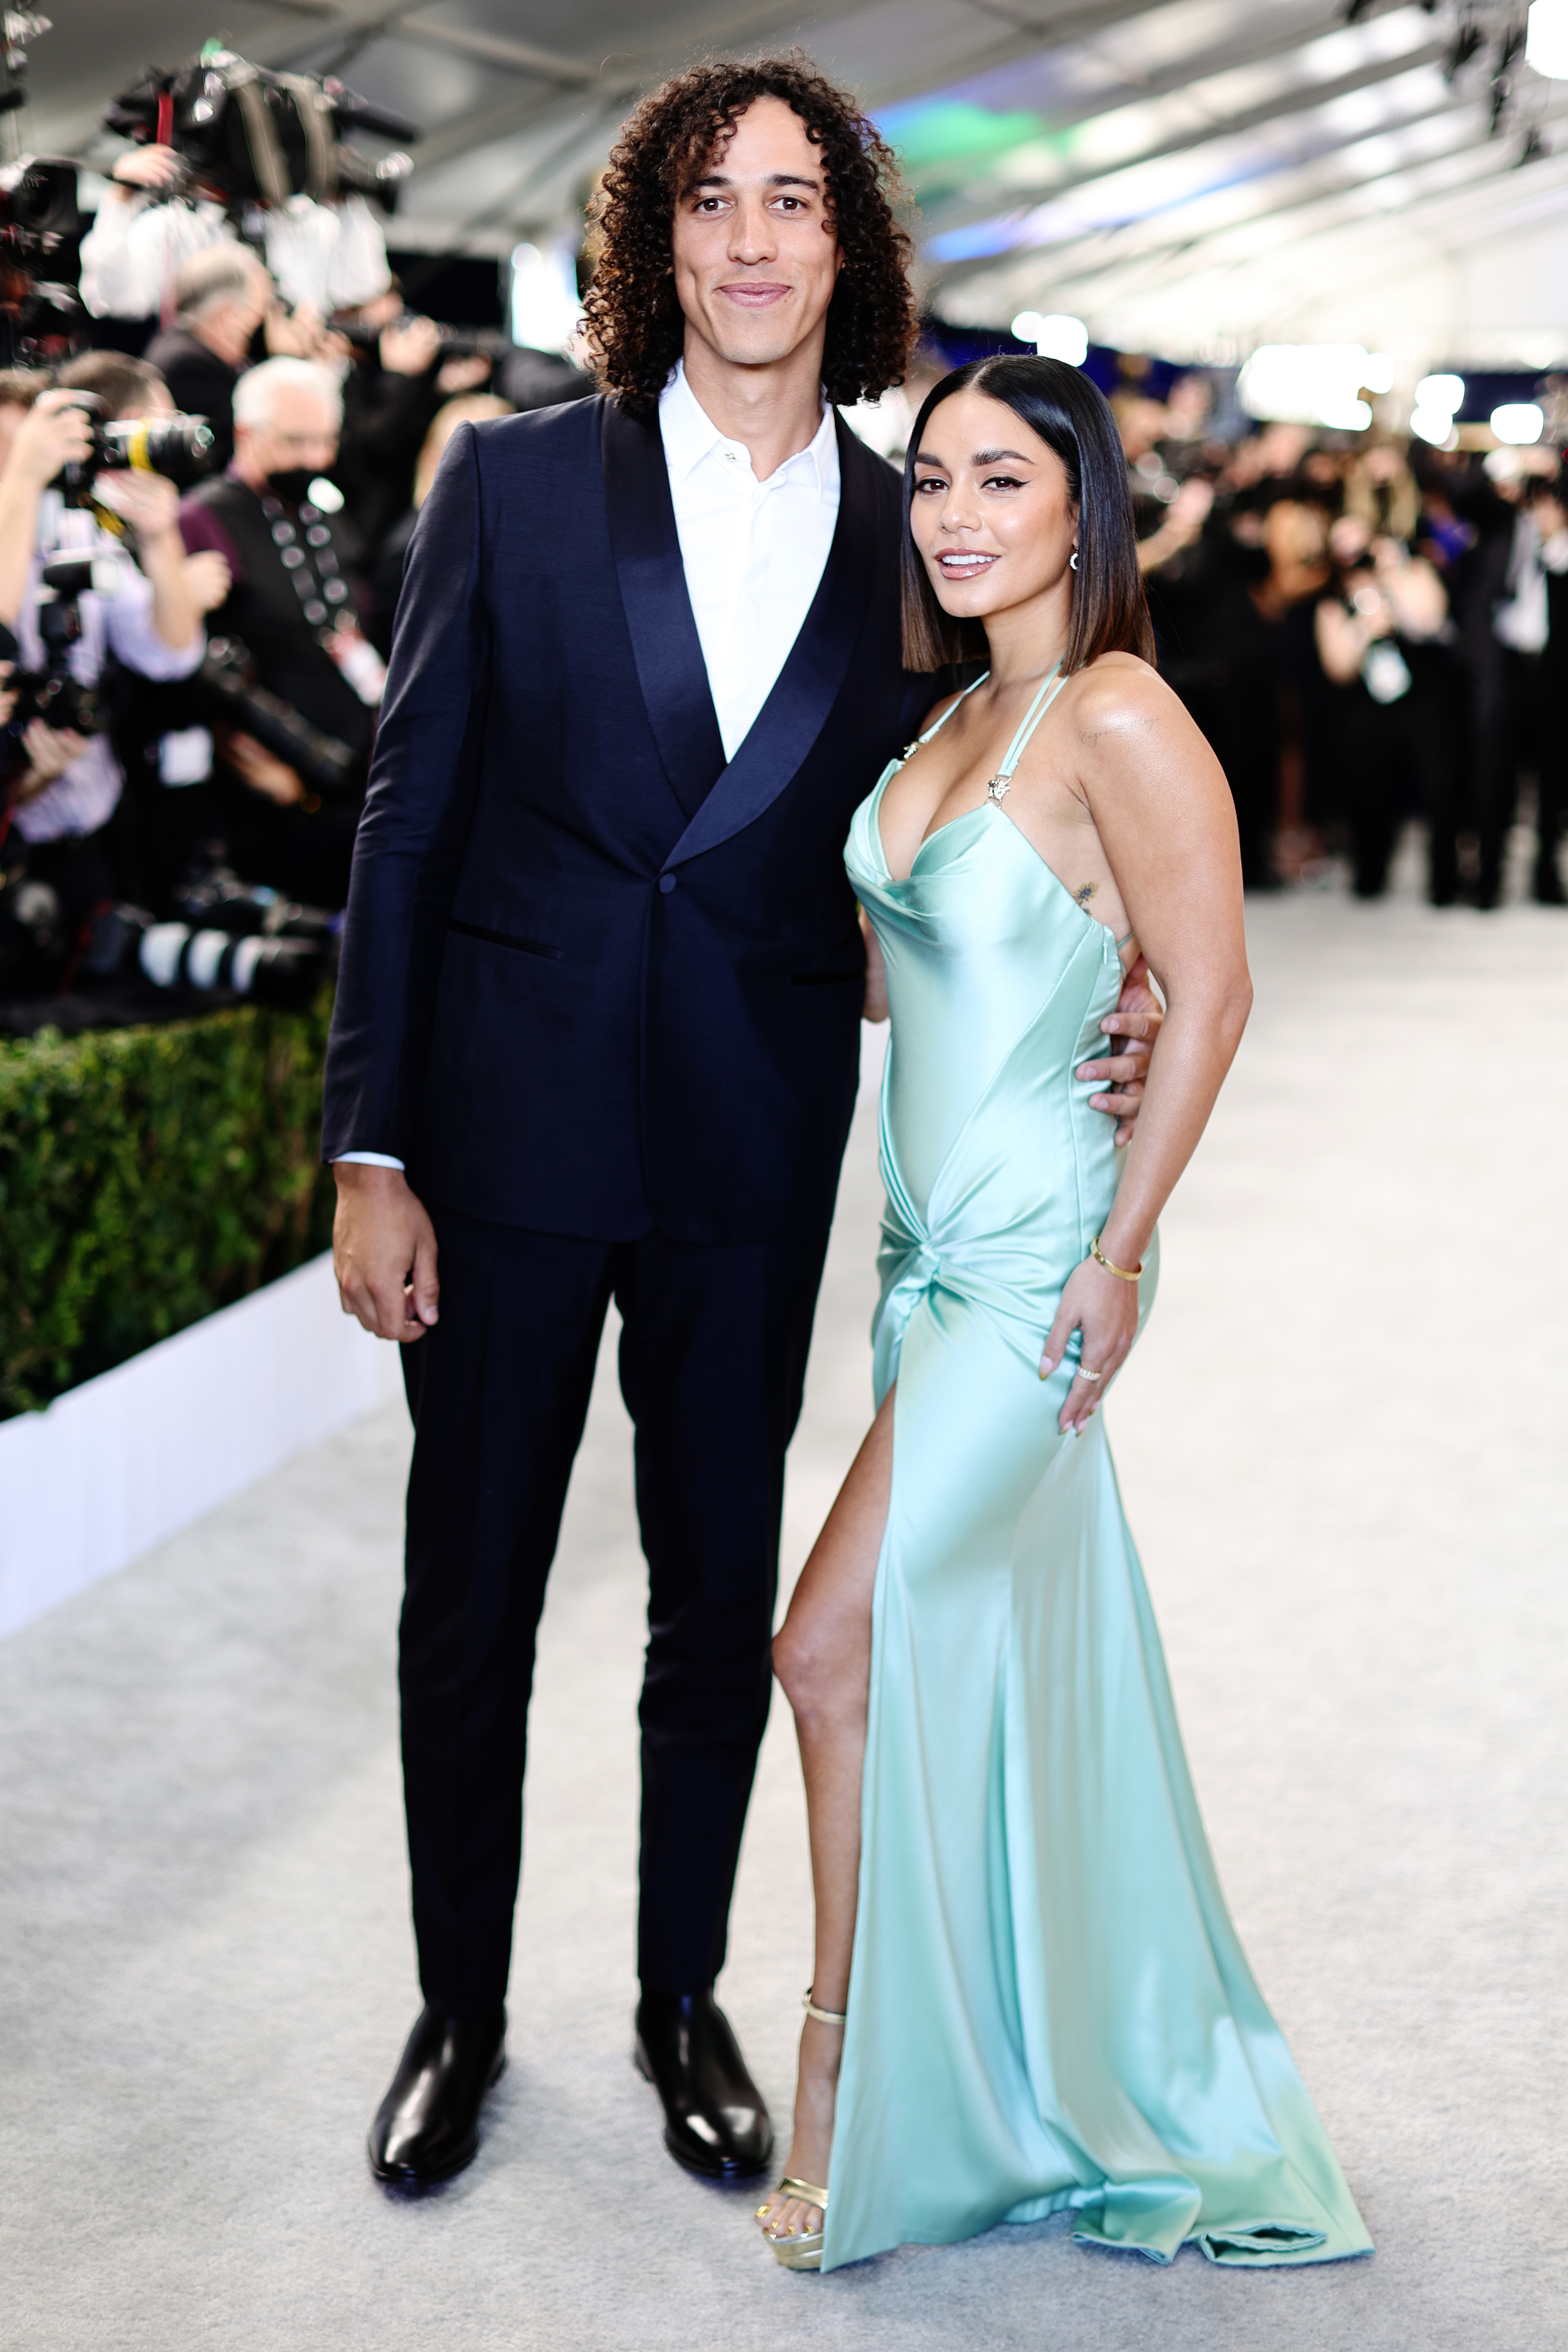 Cole in a satin suit and Vanessa Hudgens in a silky gown with a thigh-high slit pose together on a red carpet, smiling at the camera. Photographers are in the background